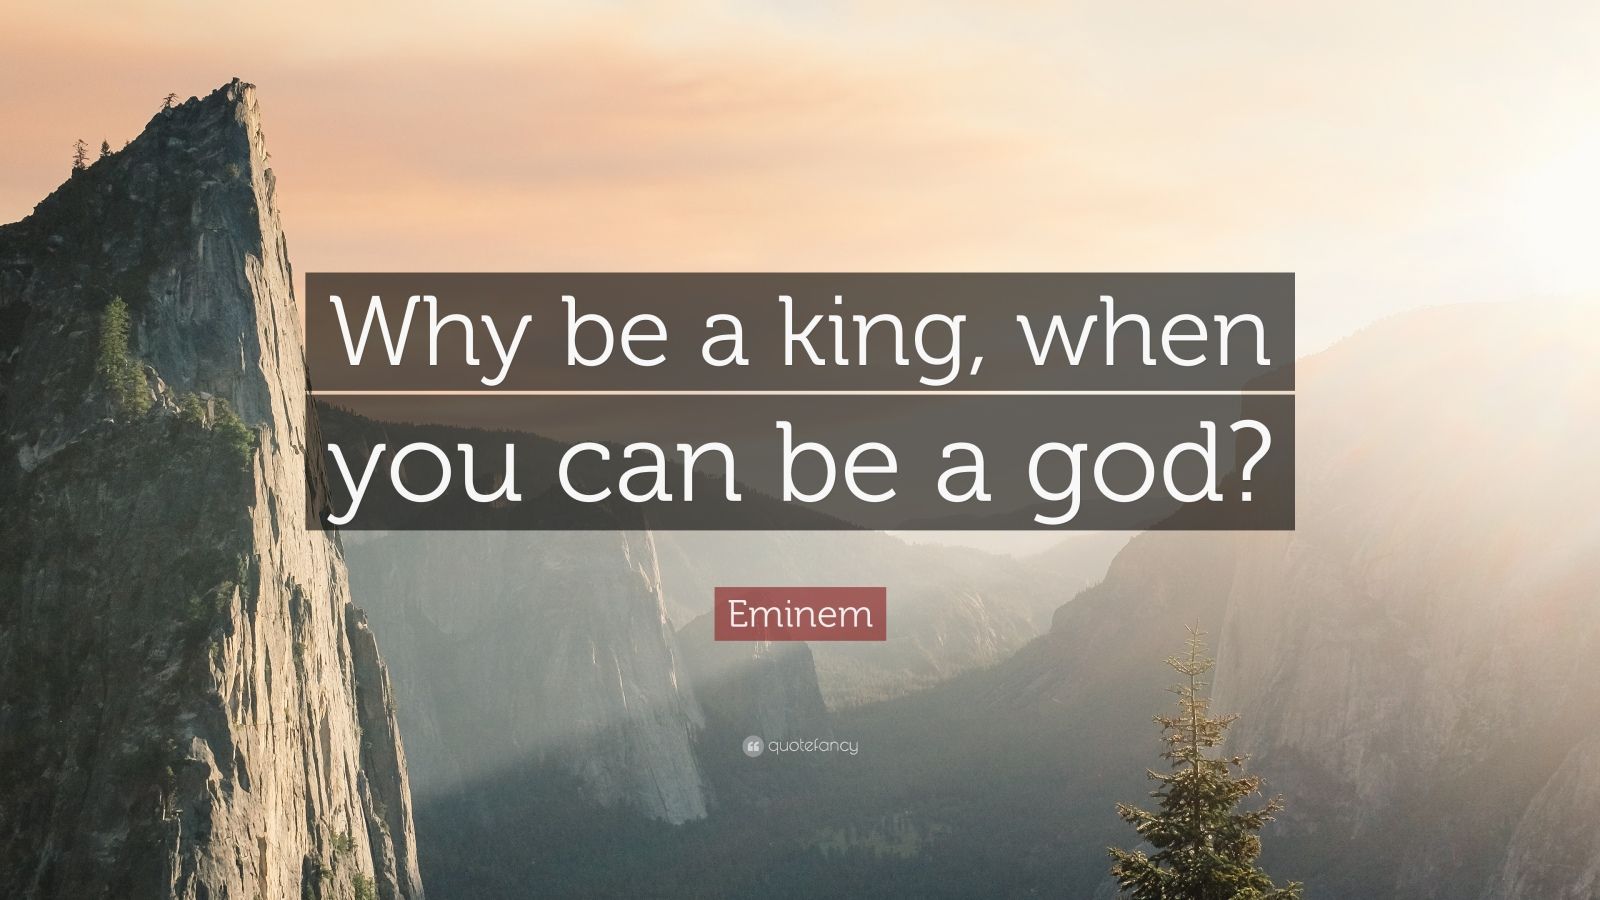 Eminem Quote: "Why be a king, when you can be a god?" (18 wallpapers) - Quotefancy